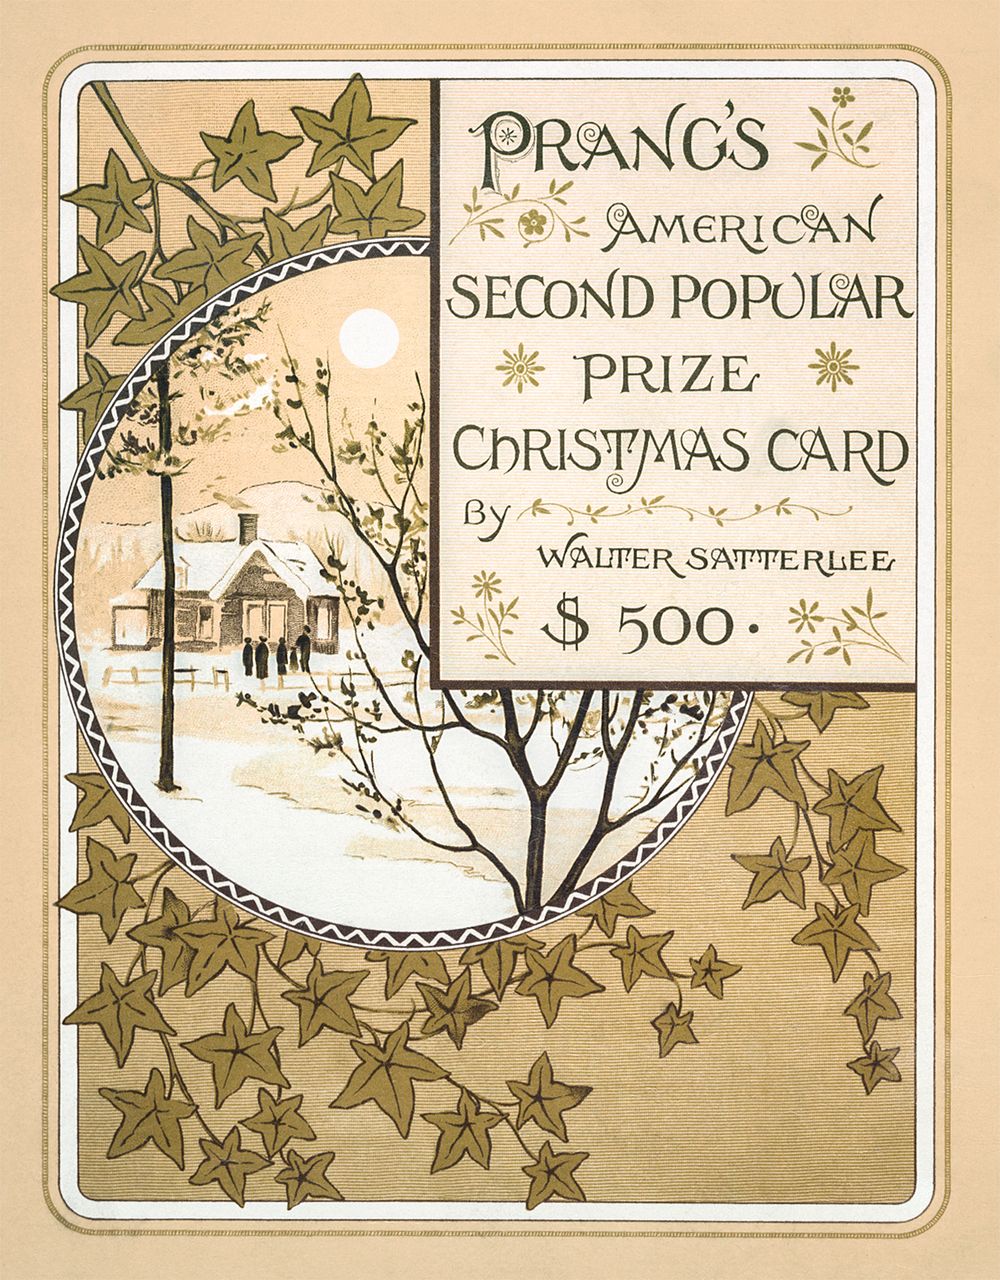 Vintage Christmas Card by L. Prang & Co. Original from The New York Public Library. Digitally enhanced by rawpixel.